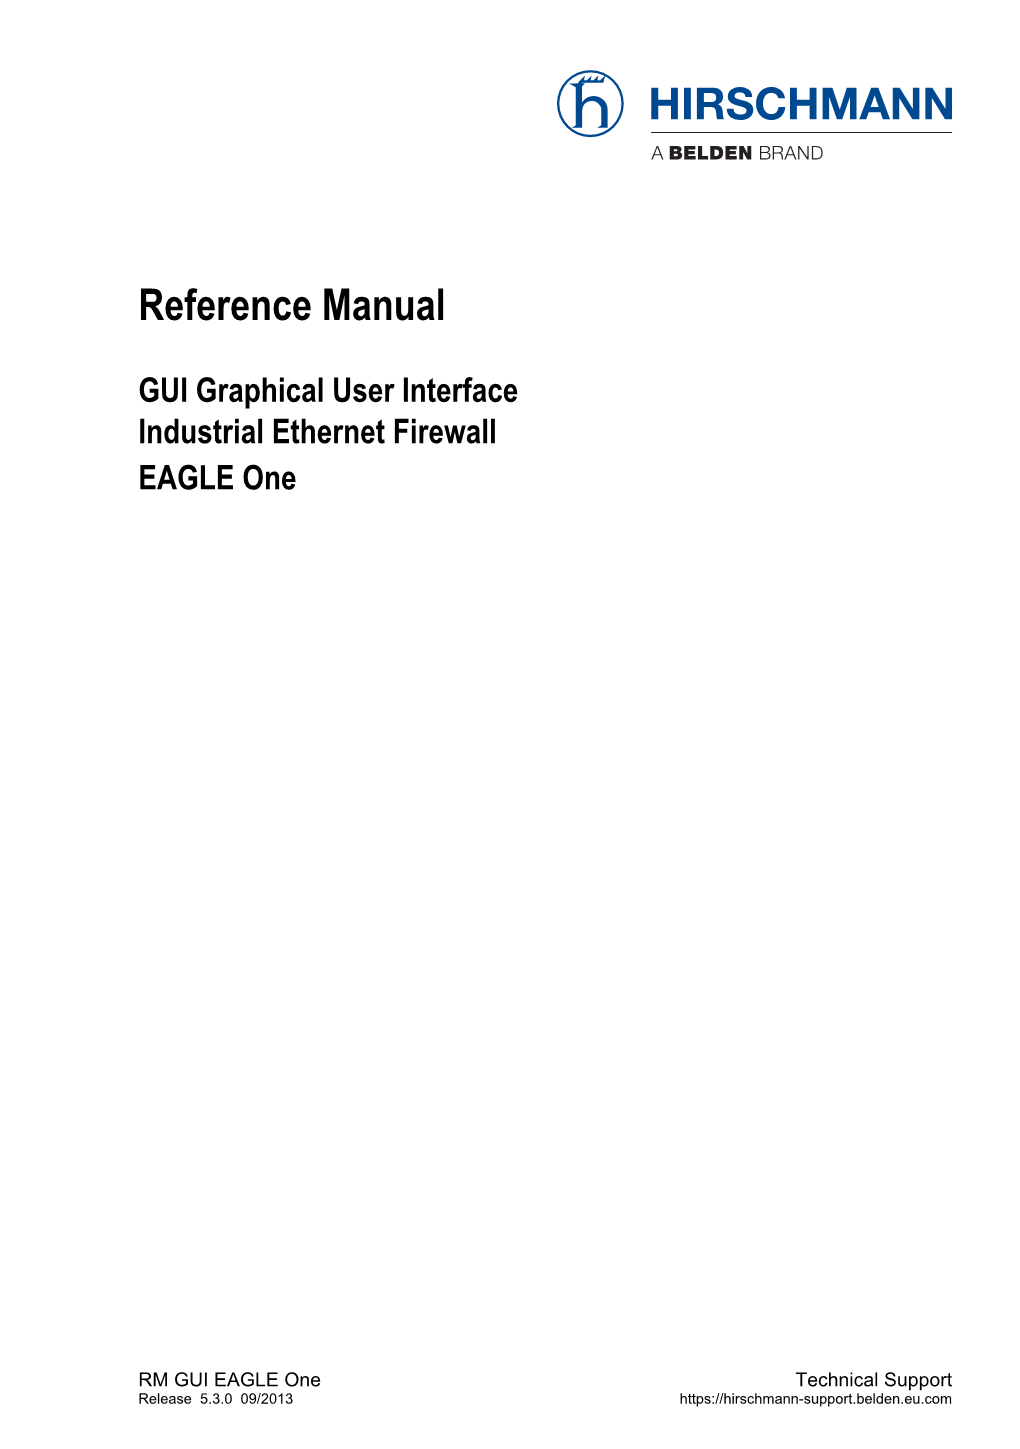 Reference Manual GUI Graphical User Interface EAGLE One Rel. 5.3